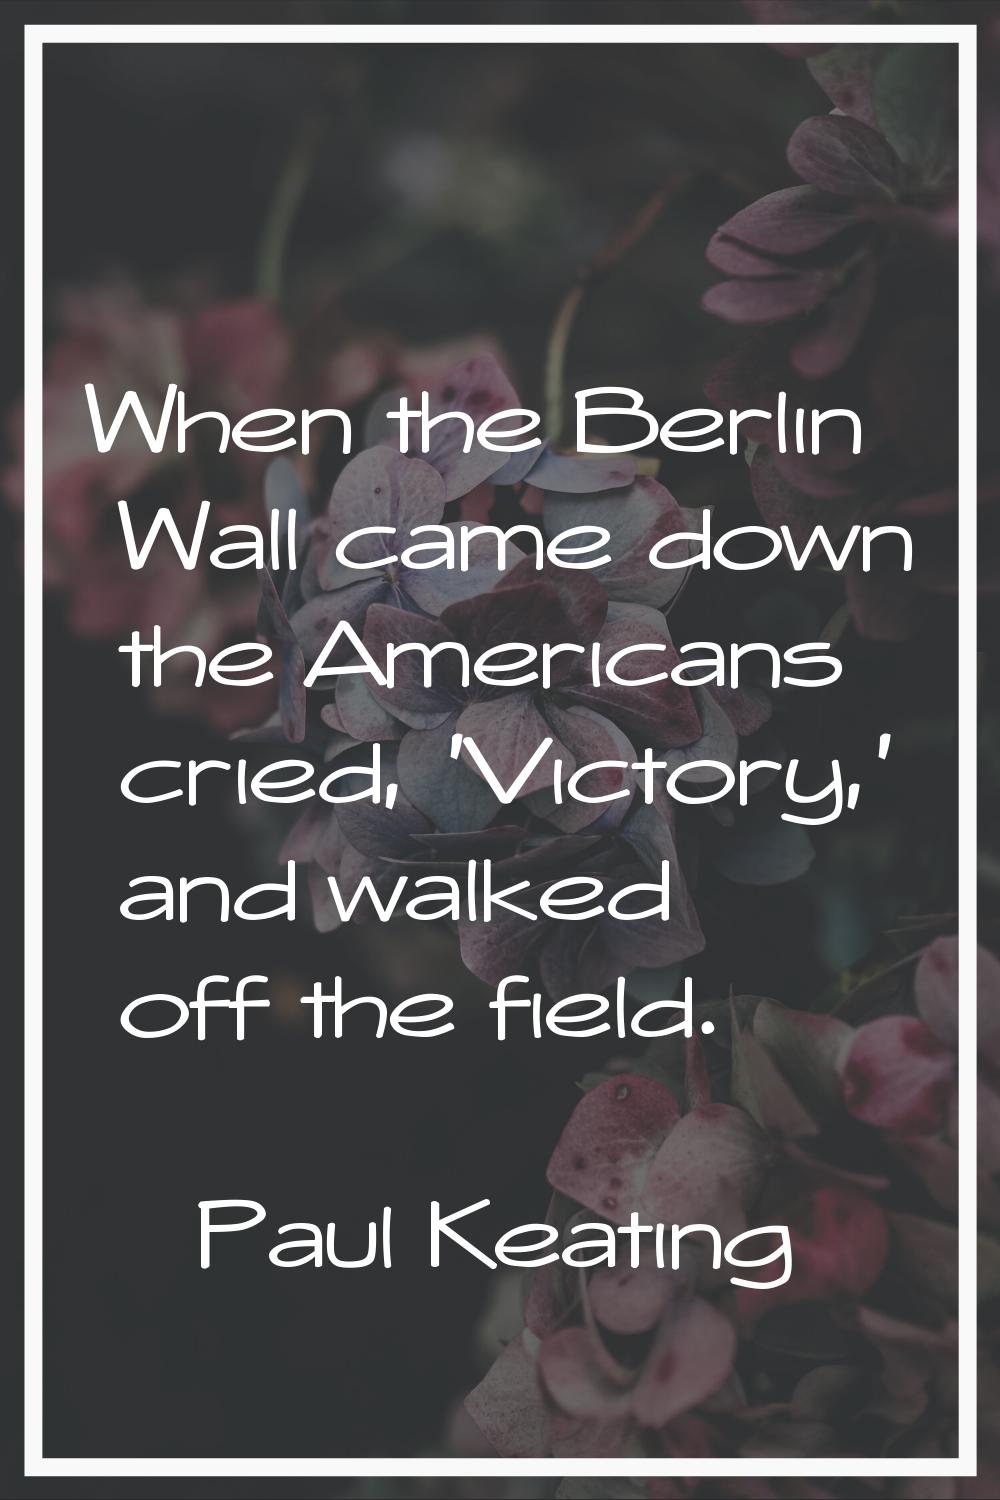 When the Berlin Wall came down the Americans cried, 'Victory,' and walked off the field.